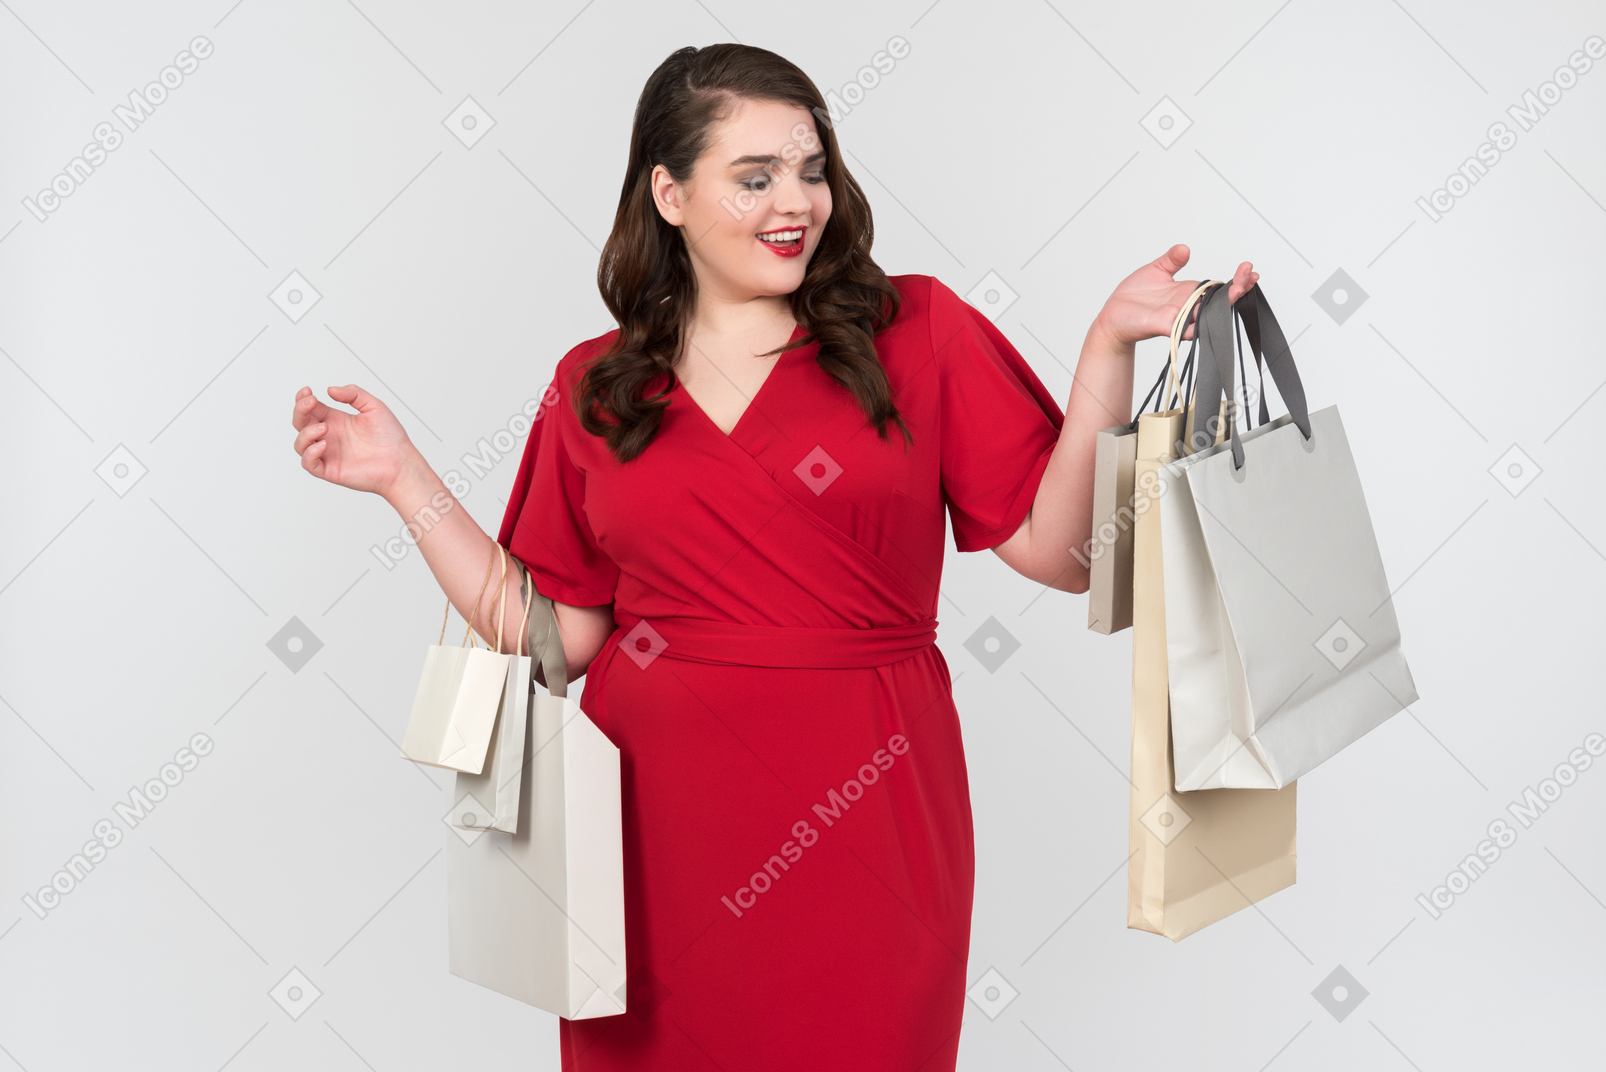 Sometimes for great mood you just need shopping